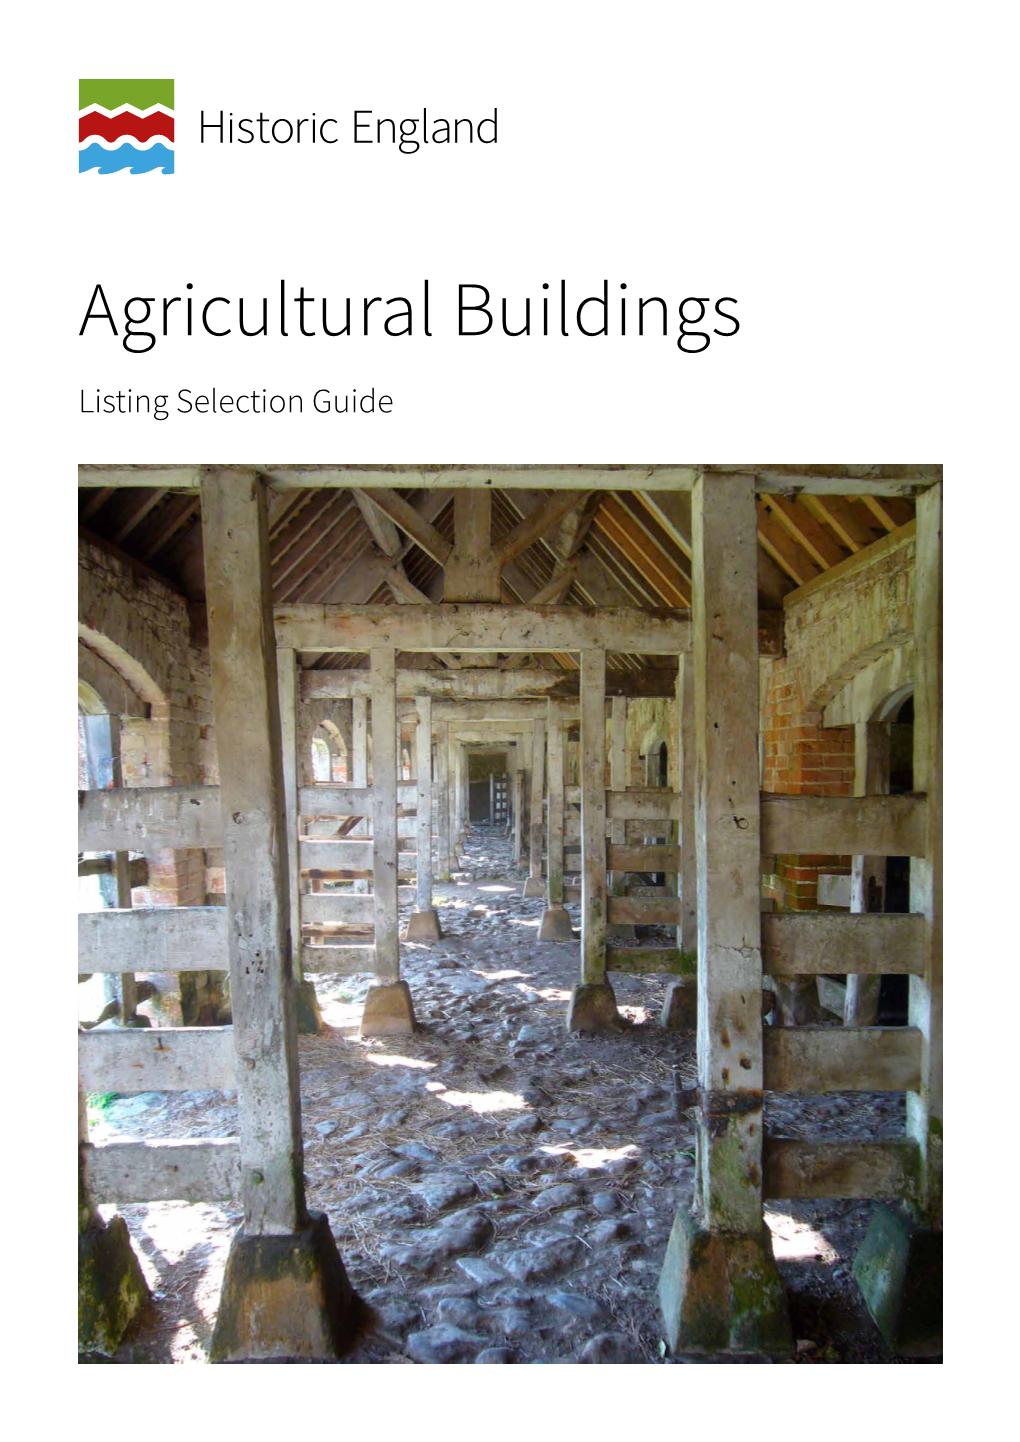 Agricultural Buildings Listing Selection Guide Summary